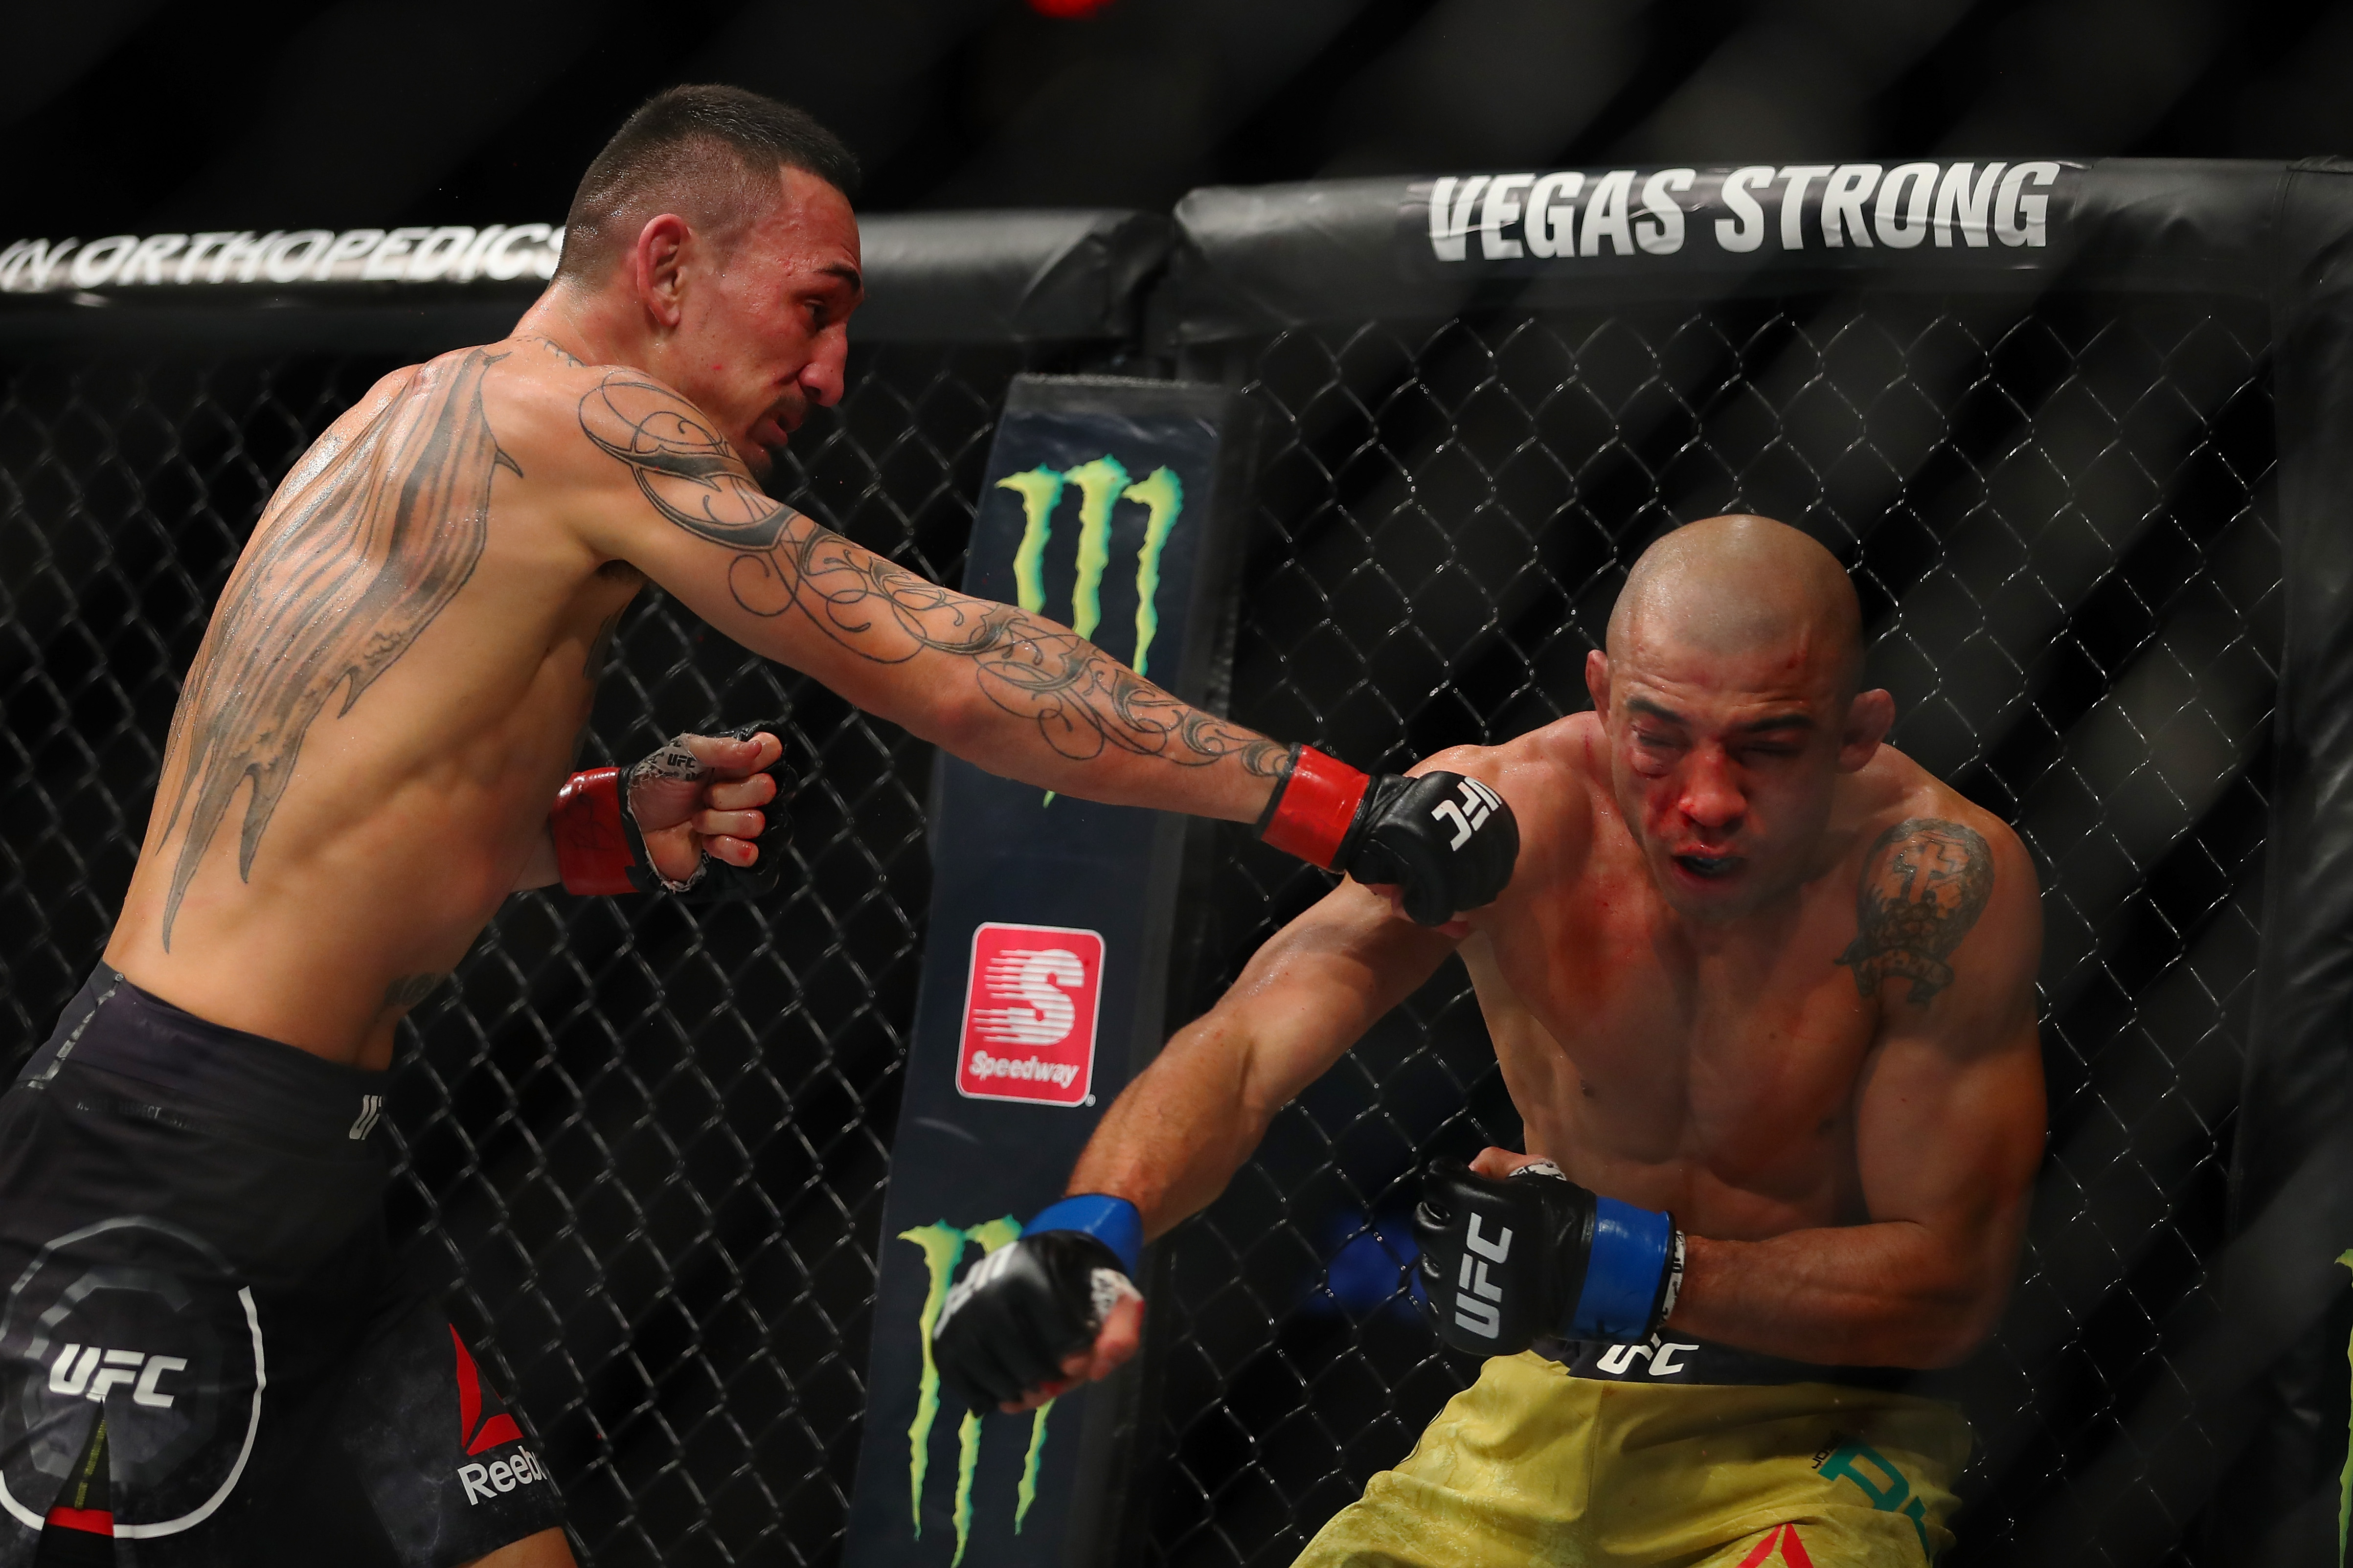 7DETROIT, MI - DECEMBER 02: Max Holloway (L) battles  Jose Aldo of Brazil (R) during UFC 218 at Little Caesars Arena on December 2, 2018 in Detroit, Michigan. (Photo by Gregory Shamus/Getty Images)